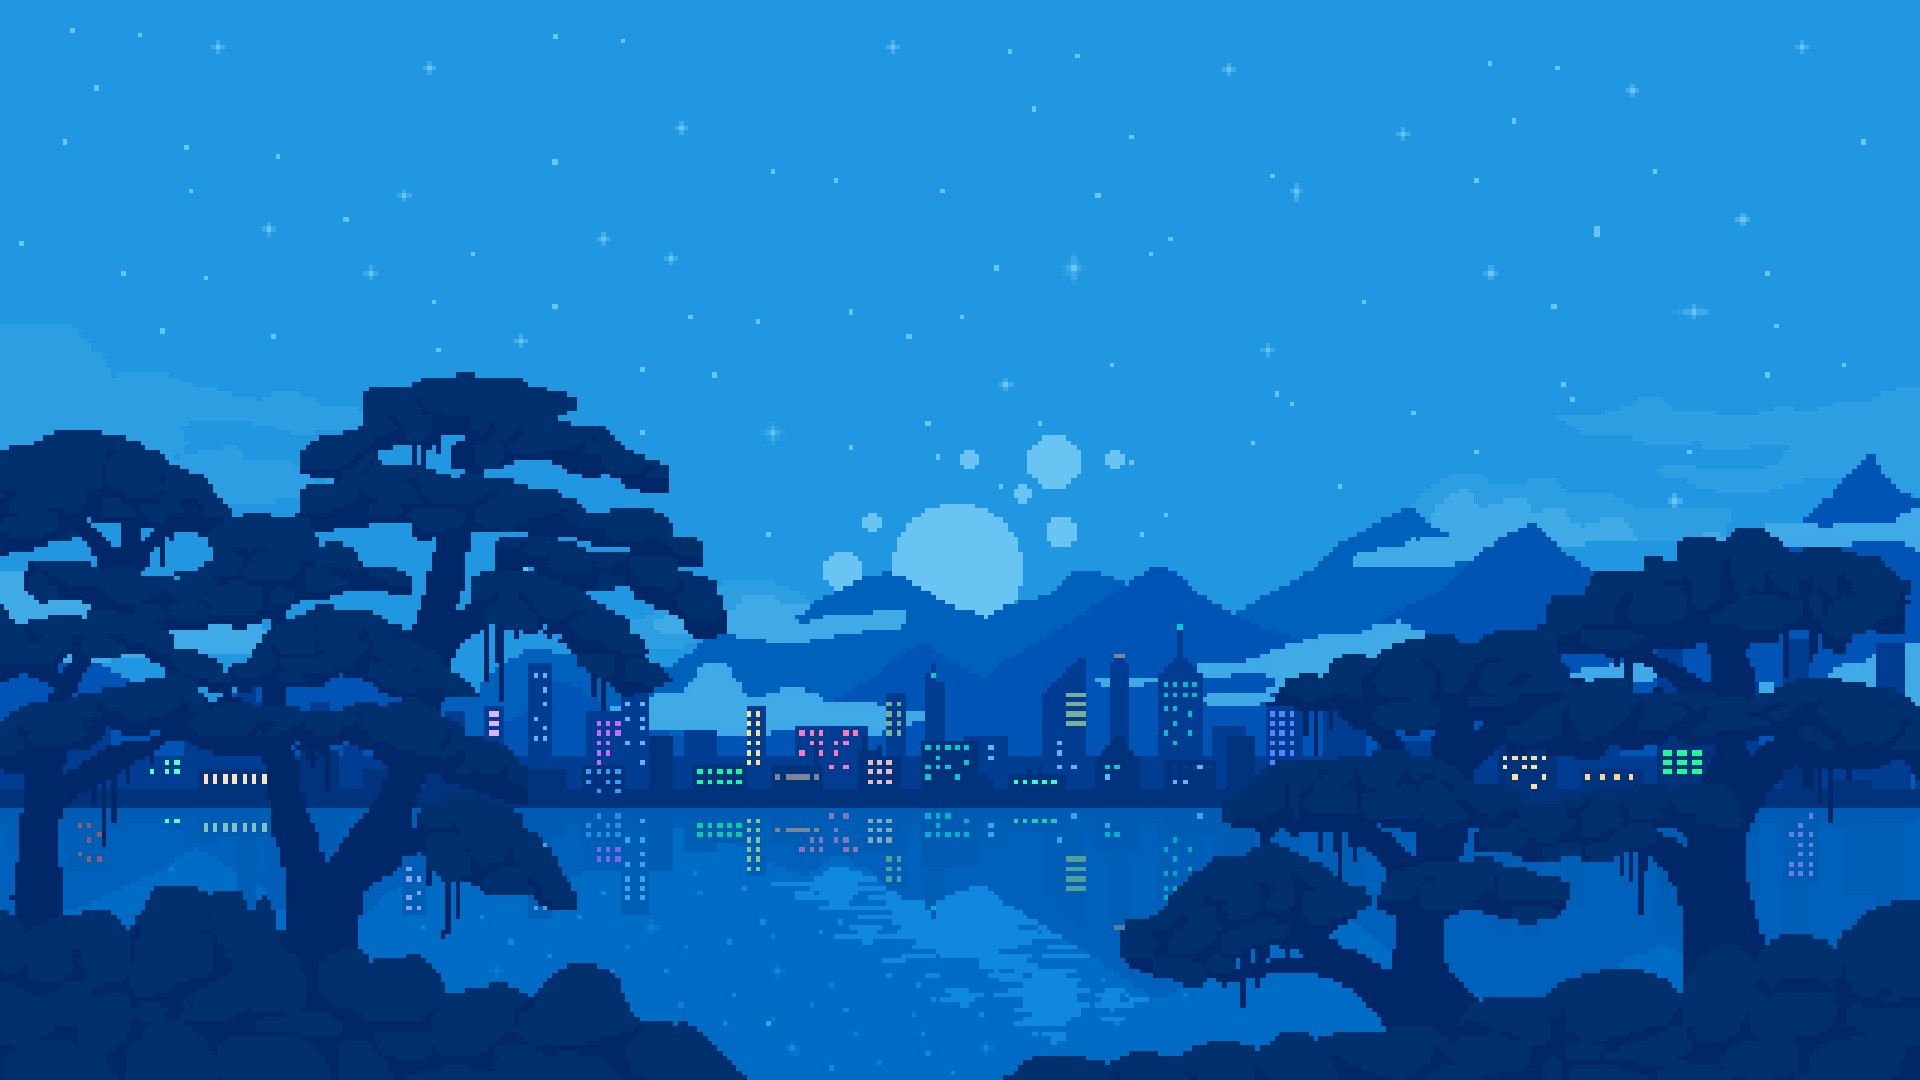 1080x2400 Town 8 Bit 1080x2400 Resolution Wallpaper Hd Artist 4k Wallpapers Images Photos And Background